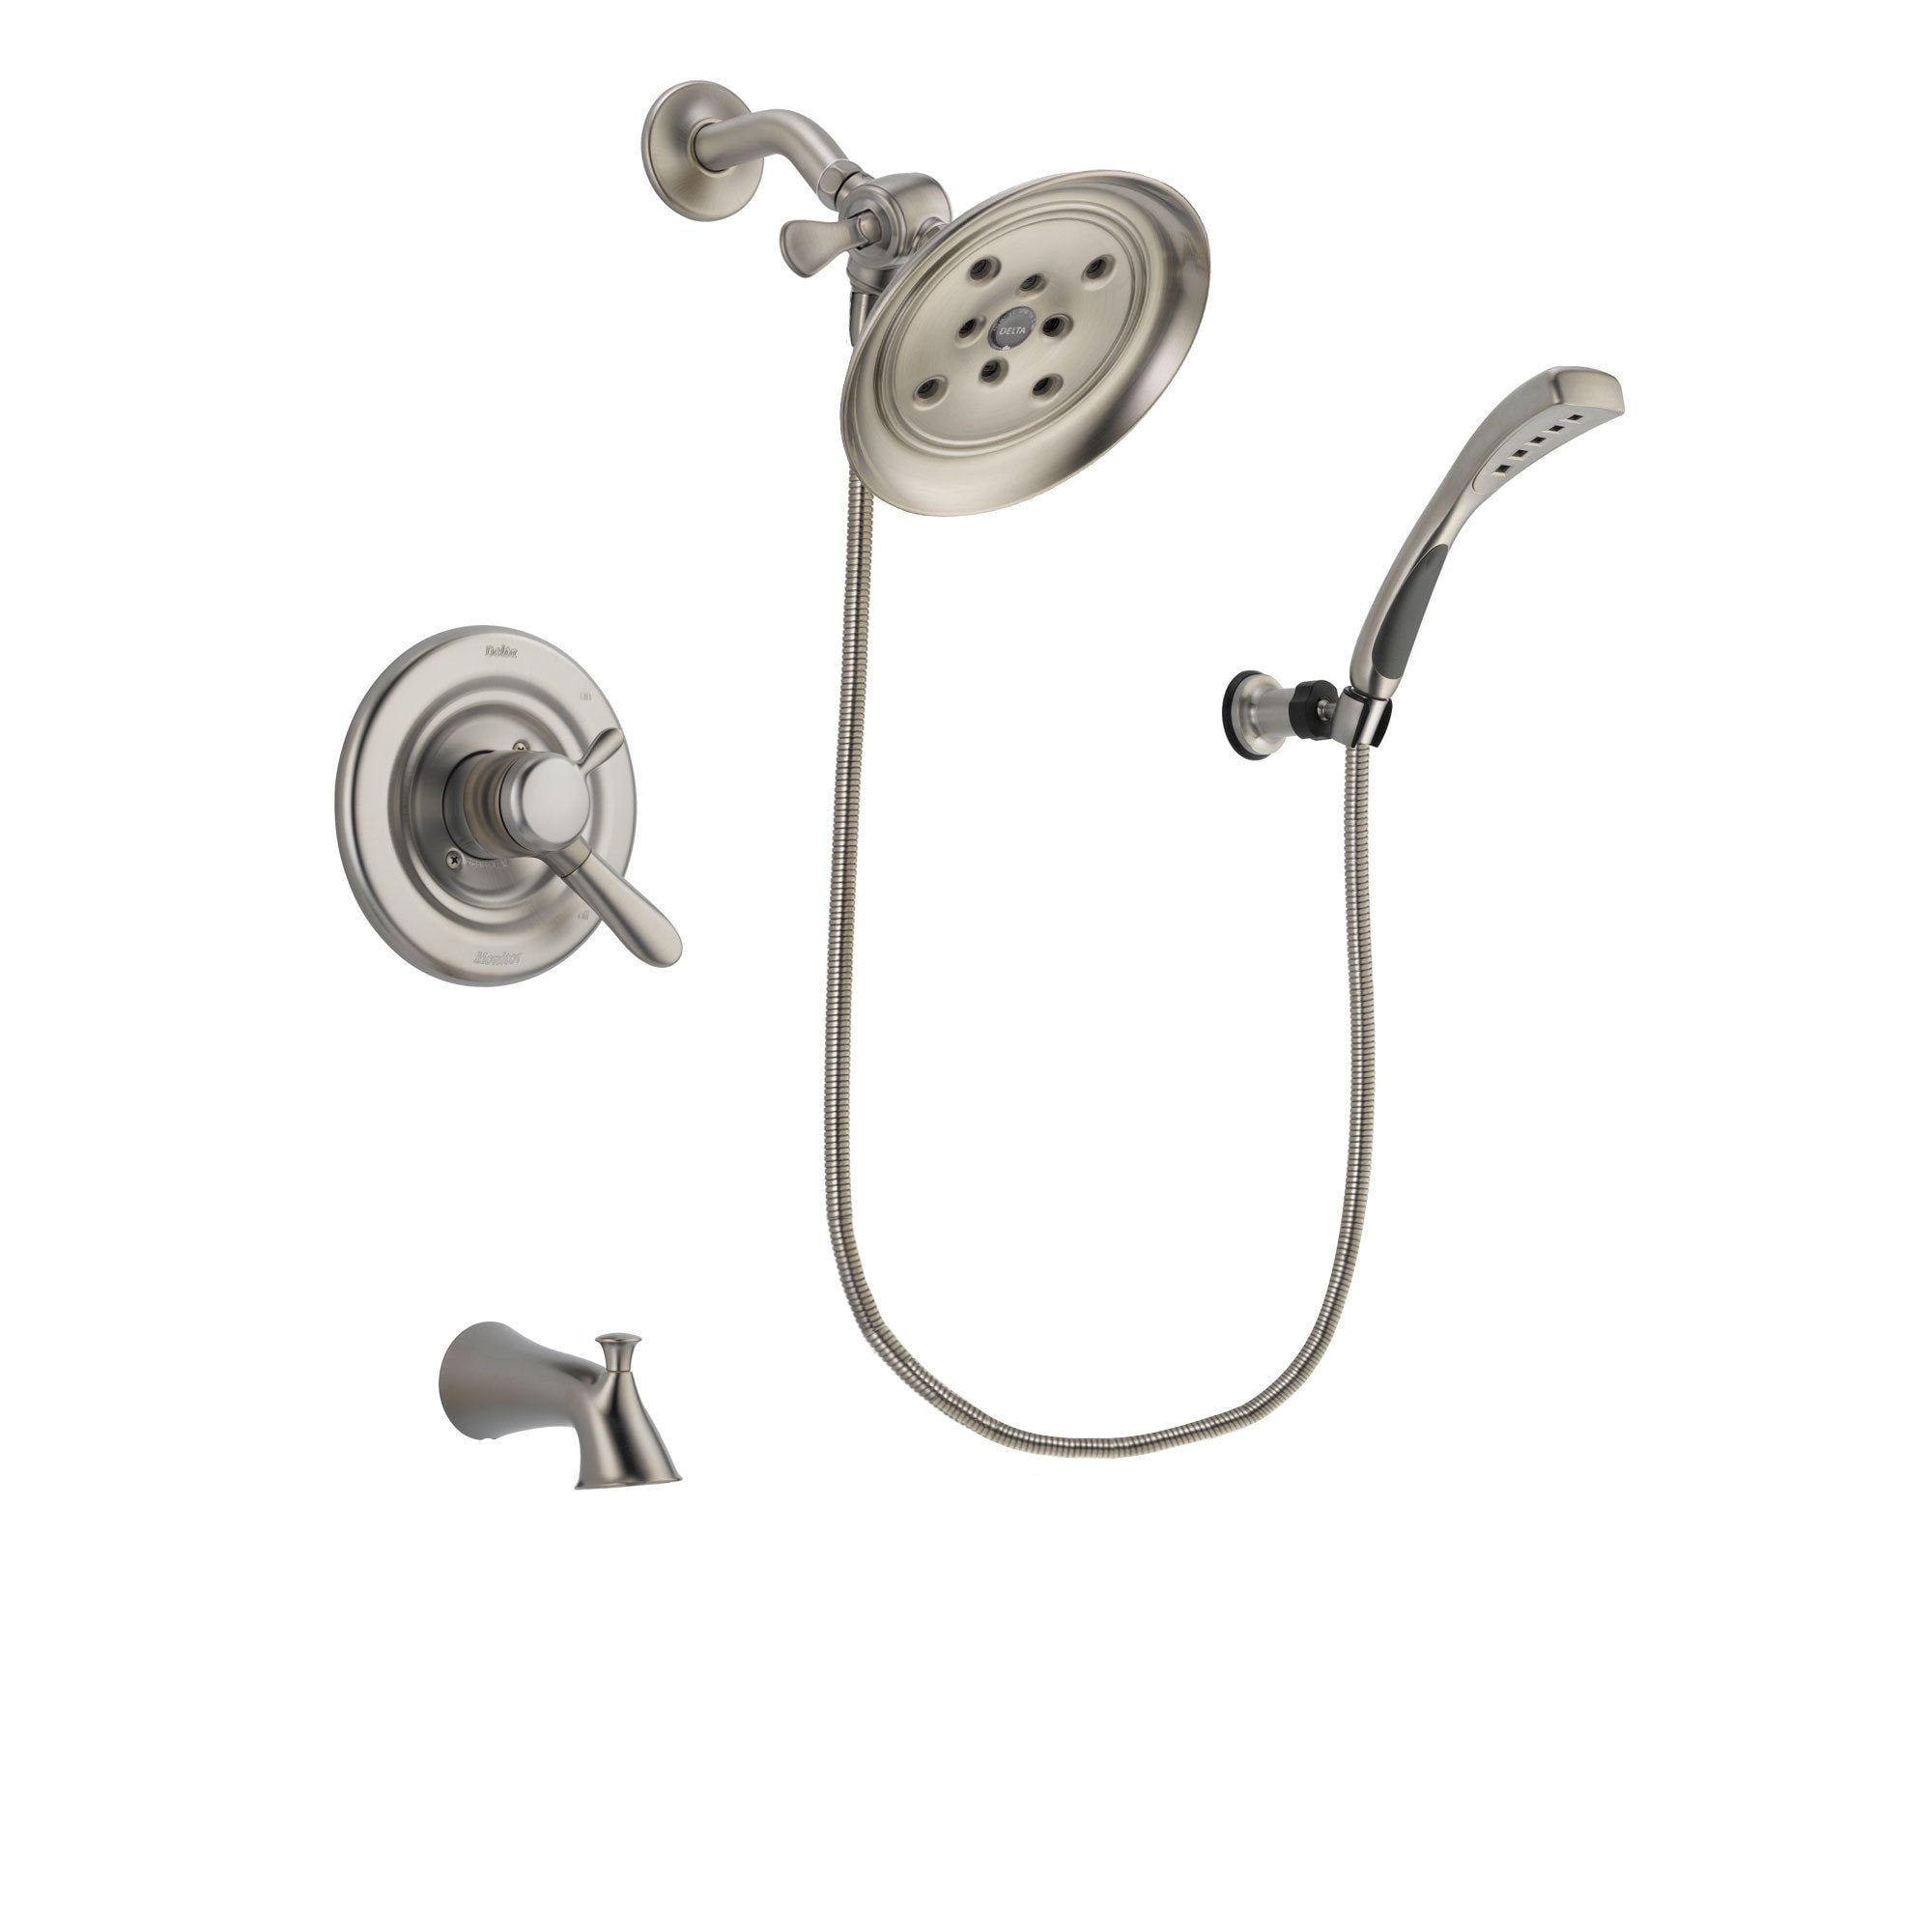 Delta Lahara Stainless Steel Finish Dual Control Tub and Shower Faucet System Package with Large Rain Showerhead and Wall Mounted Handshower Includes Rough-in Valve and Tub Spout DSP1873V